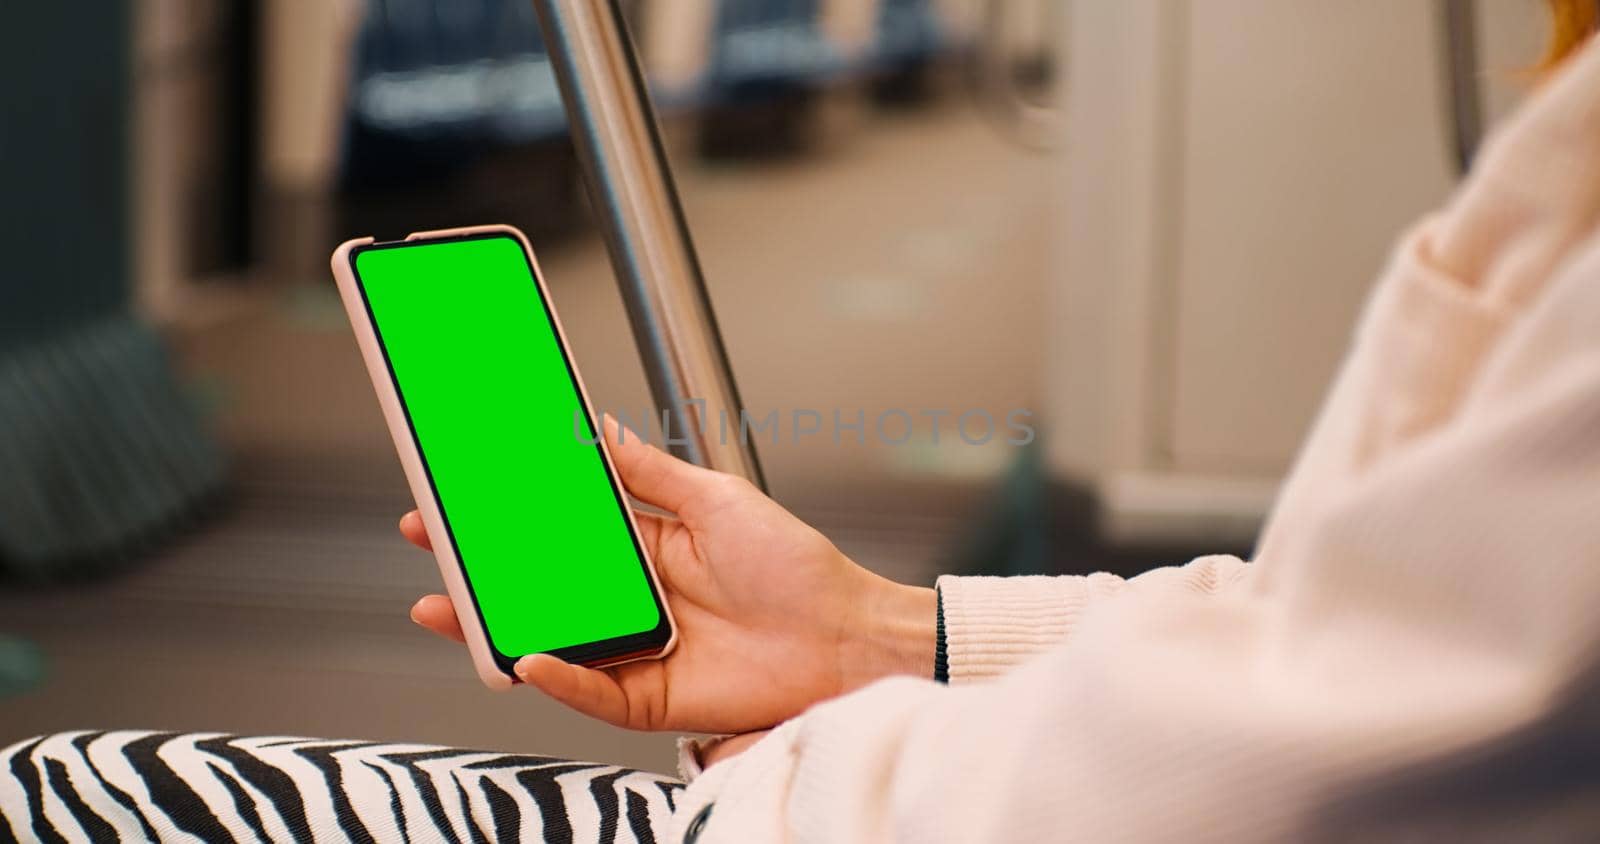 Smartphone with Green Screen Mock Up Display on train. by RecCameraStock